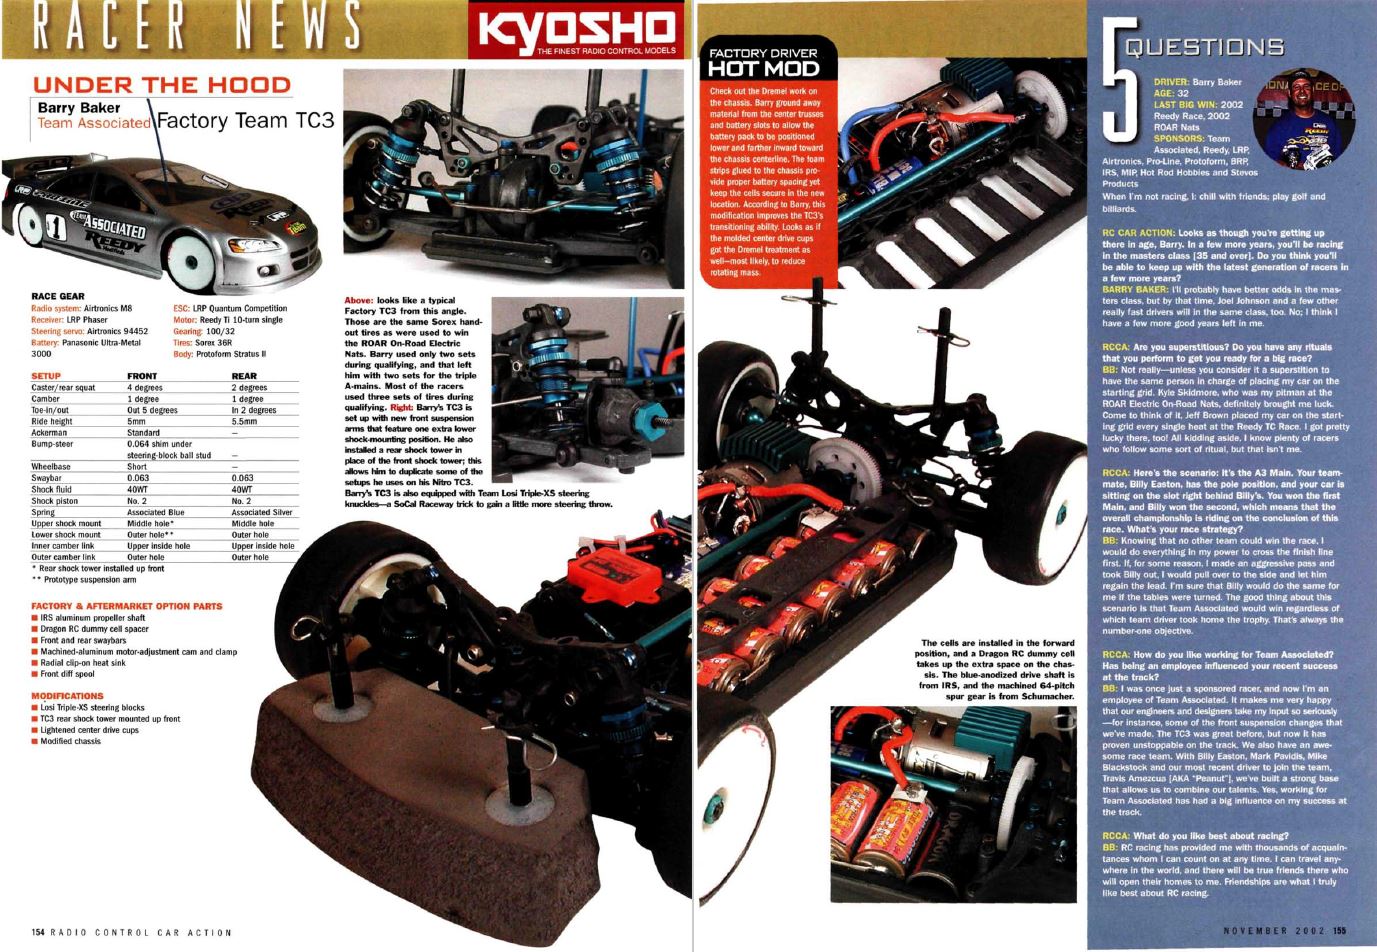 #TBT Barry Baker's Team Associated Factory Team TC3 Covered in November 2002 Issue